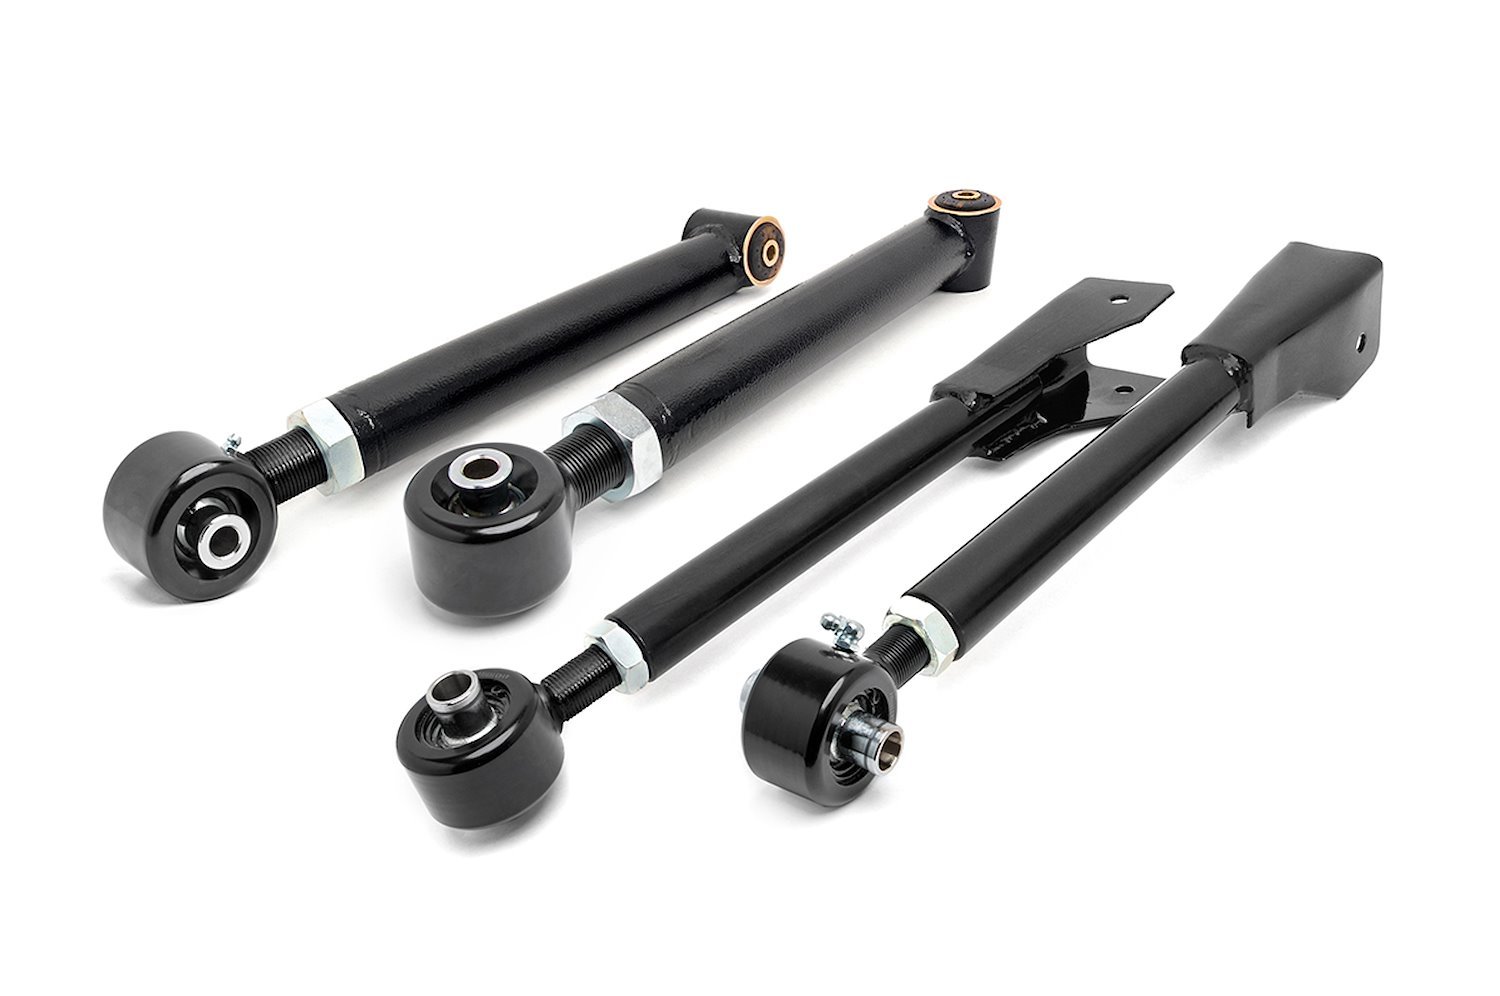 11920 Front Upper and Lower X-Flex Adjustable Control Arms for 0-6.5-inch Lifts